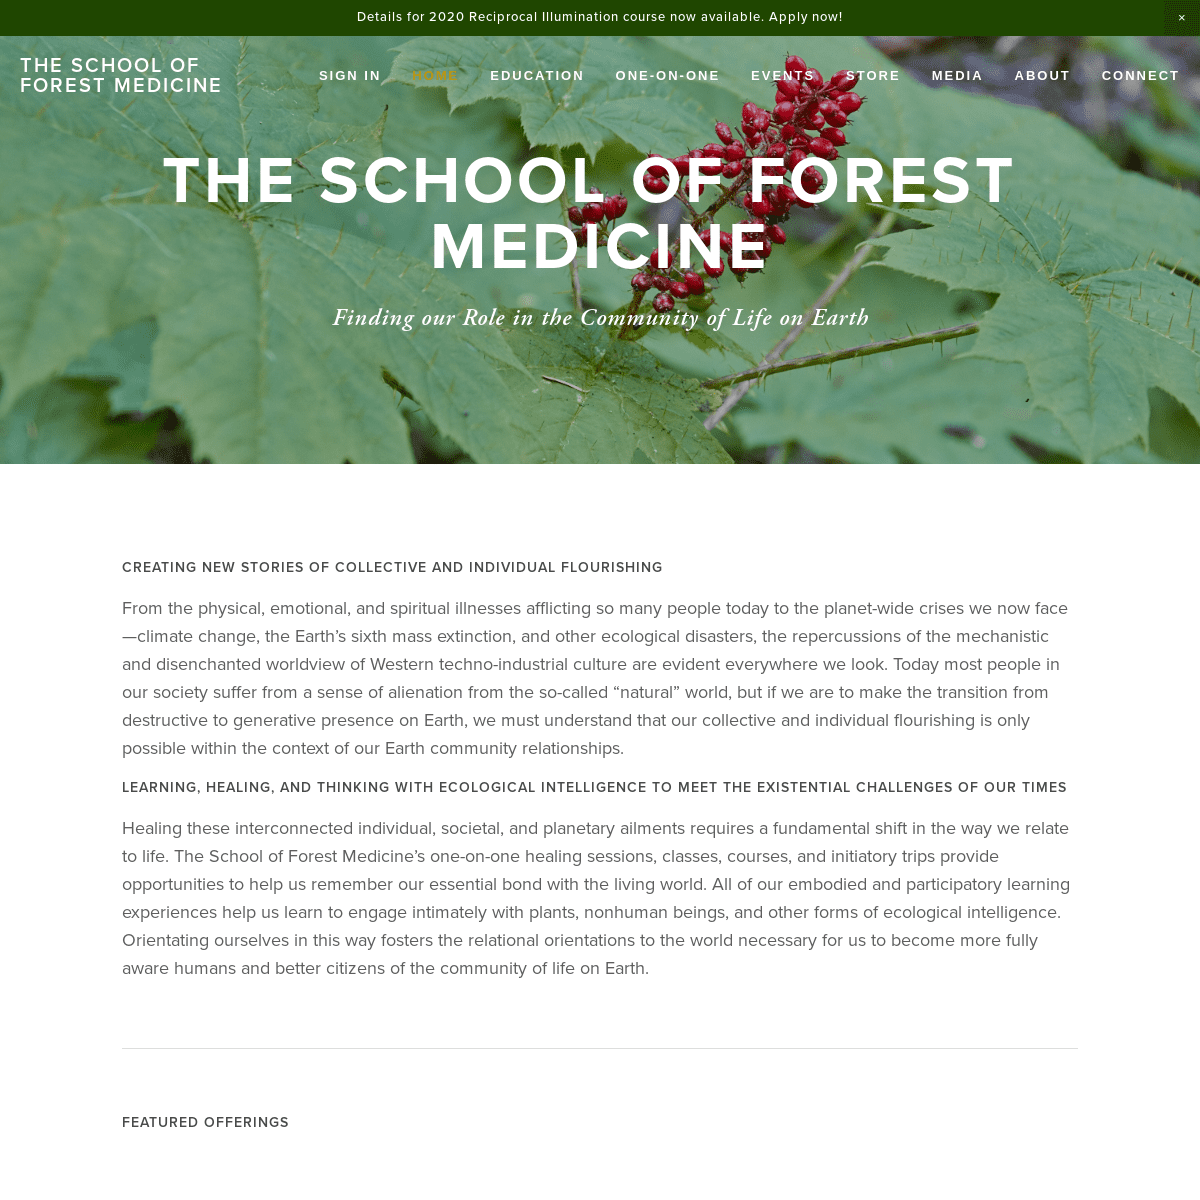 A complete backup of forestmedicine.net